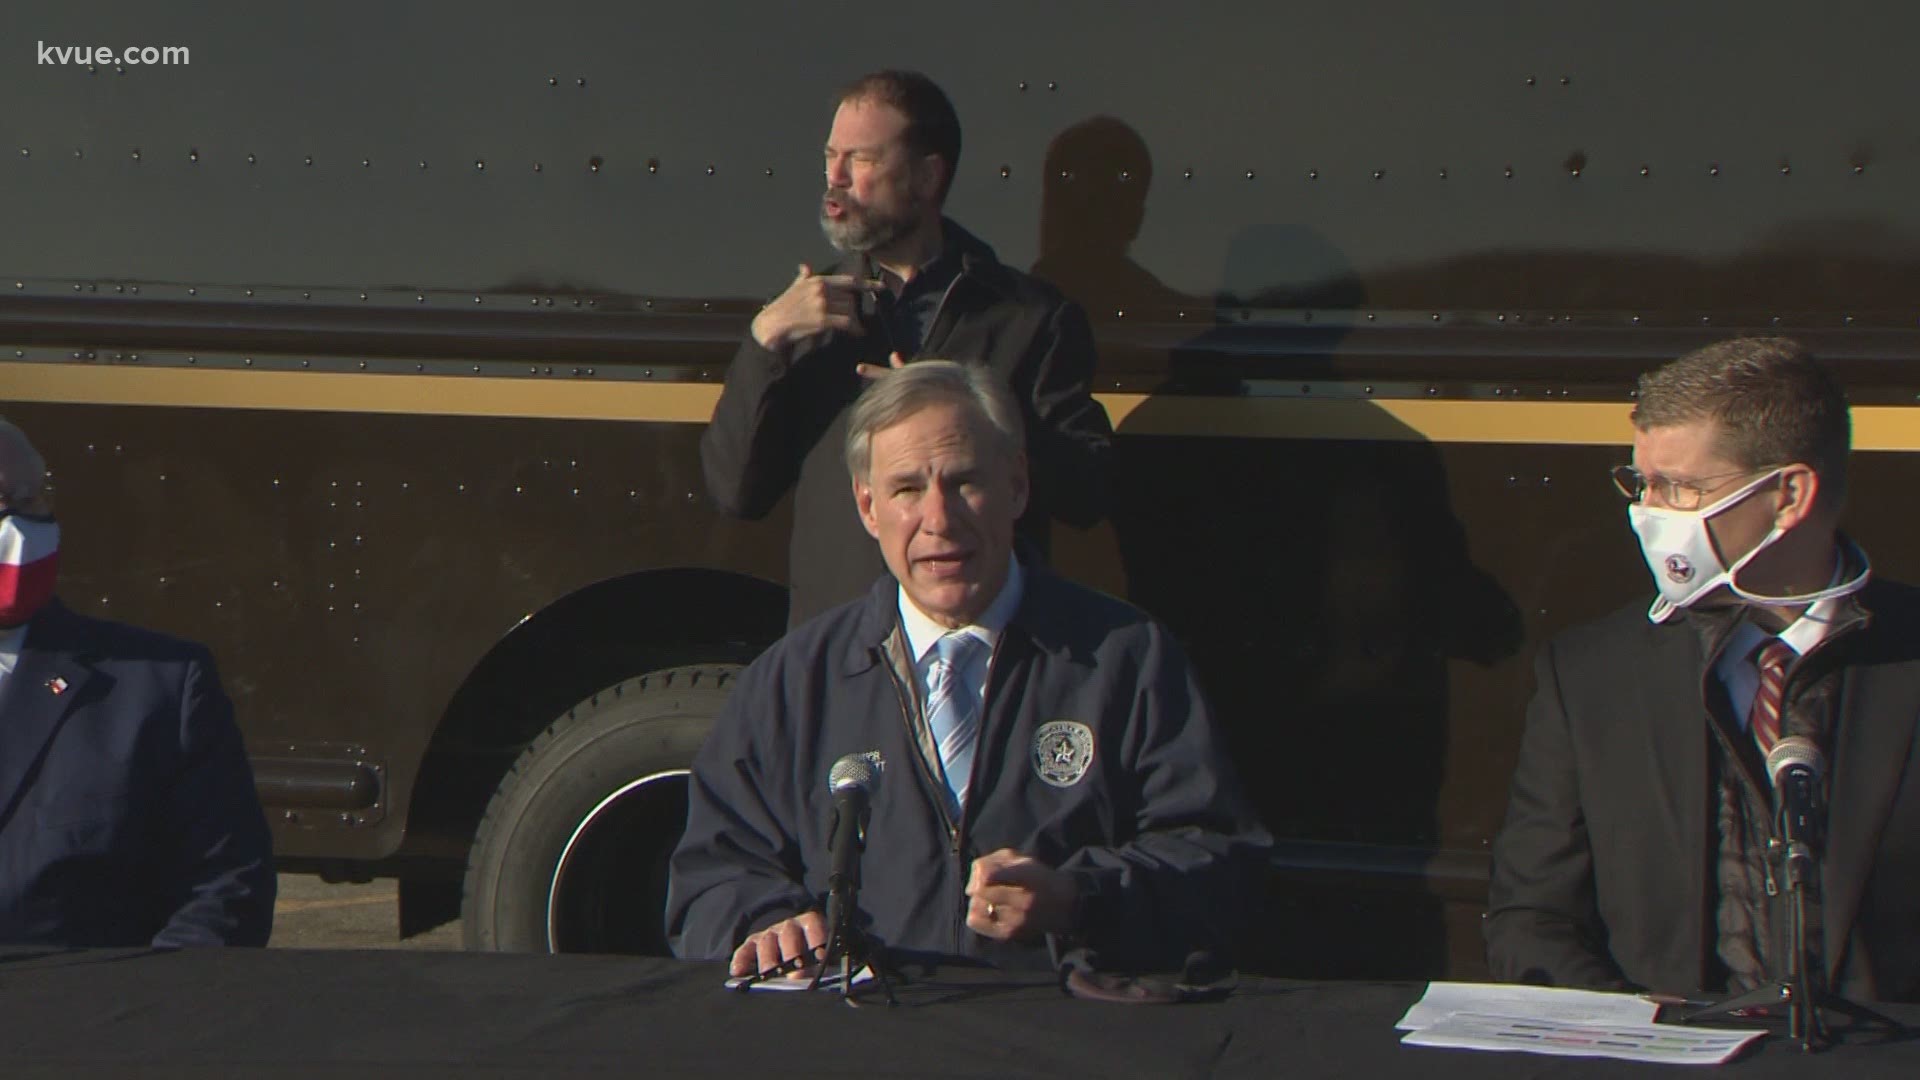 The governor explained that Texas will be getting a weekly allocation of the vaccine every week. UPS will be standing by to make that initial delivery.